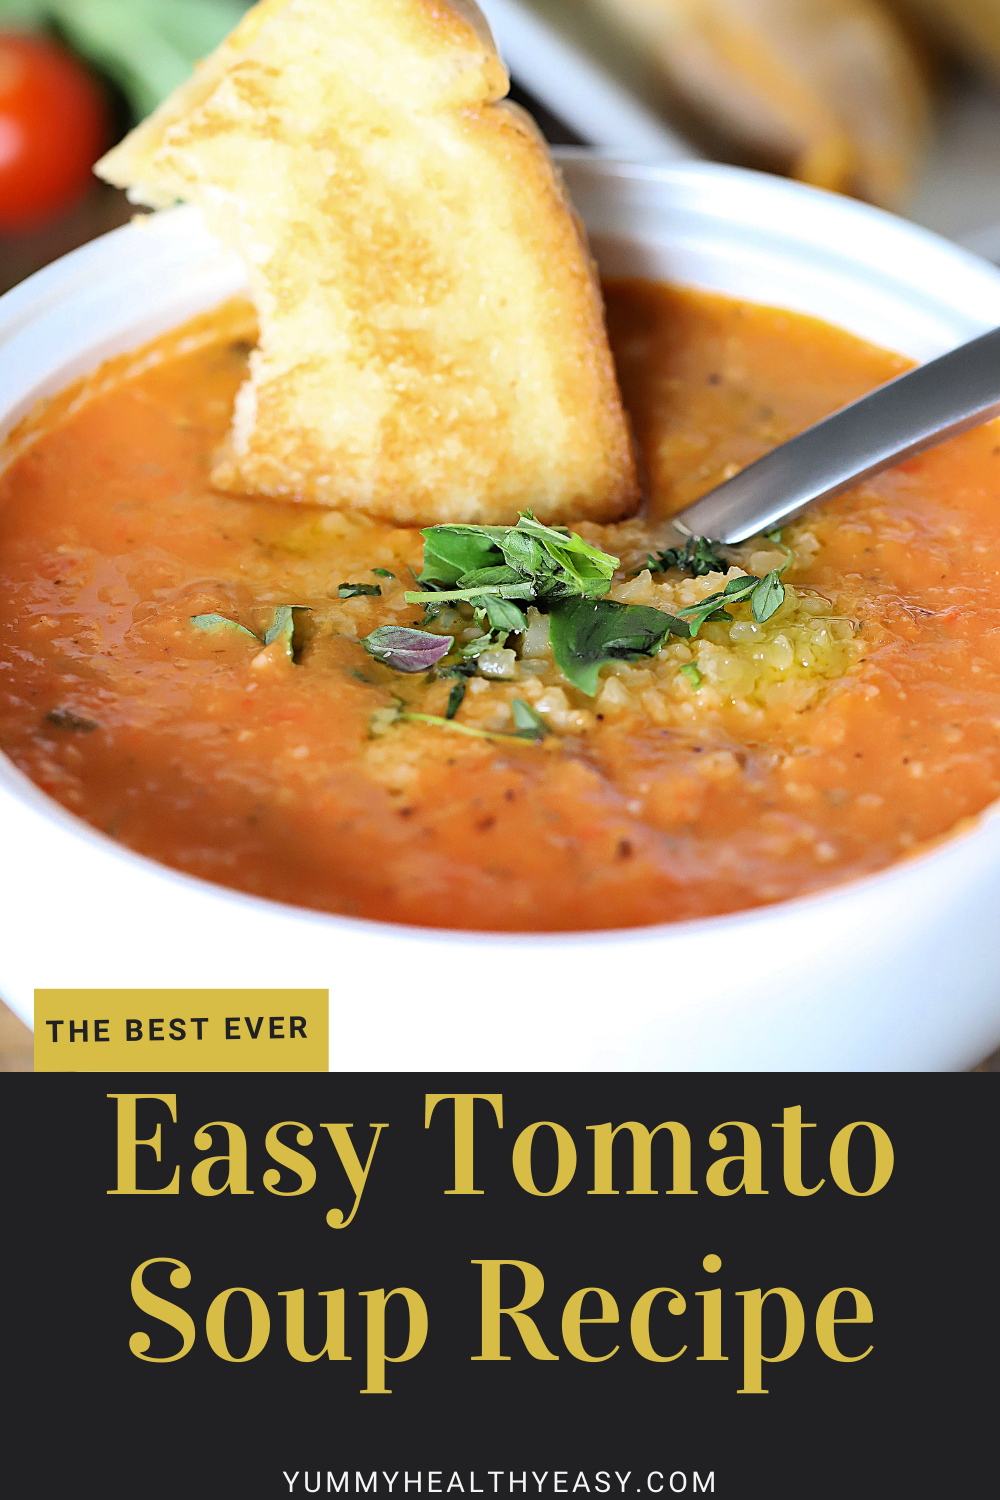 This is the Easiest Tomato Soup Recipe you'll ever make! Tomatoes, bell peppers, onion, garlic and spices are roasted and then blended up to make a delicious, easy soup that everyone will love. It's the perfect side dish to a grilled cheese sandwich! #soup #dinner #healthy #yummy #tomato #vegetables via @jennikolaus